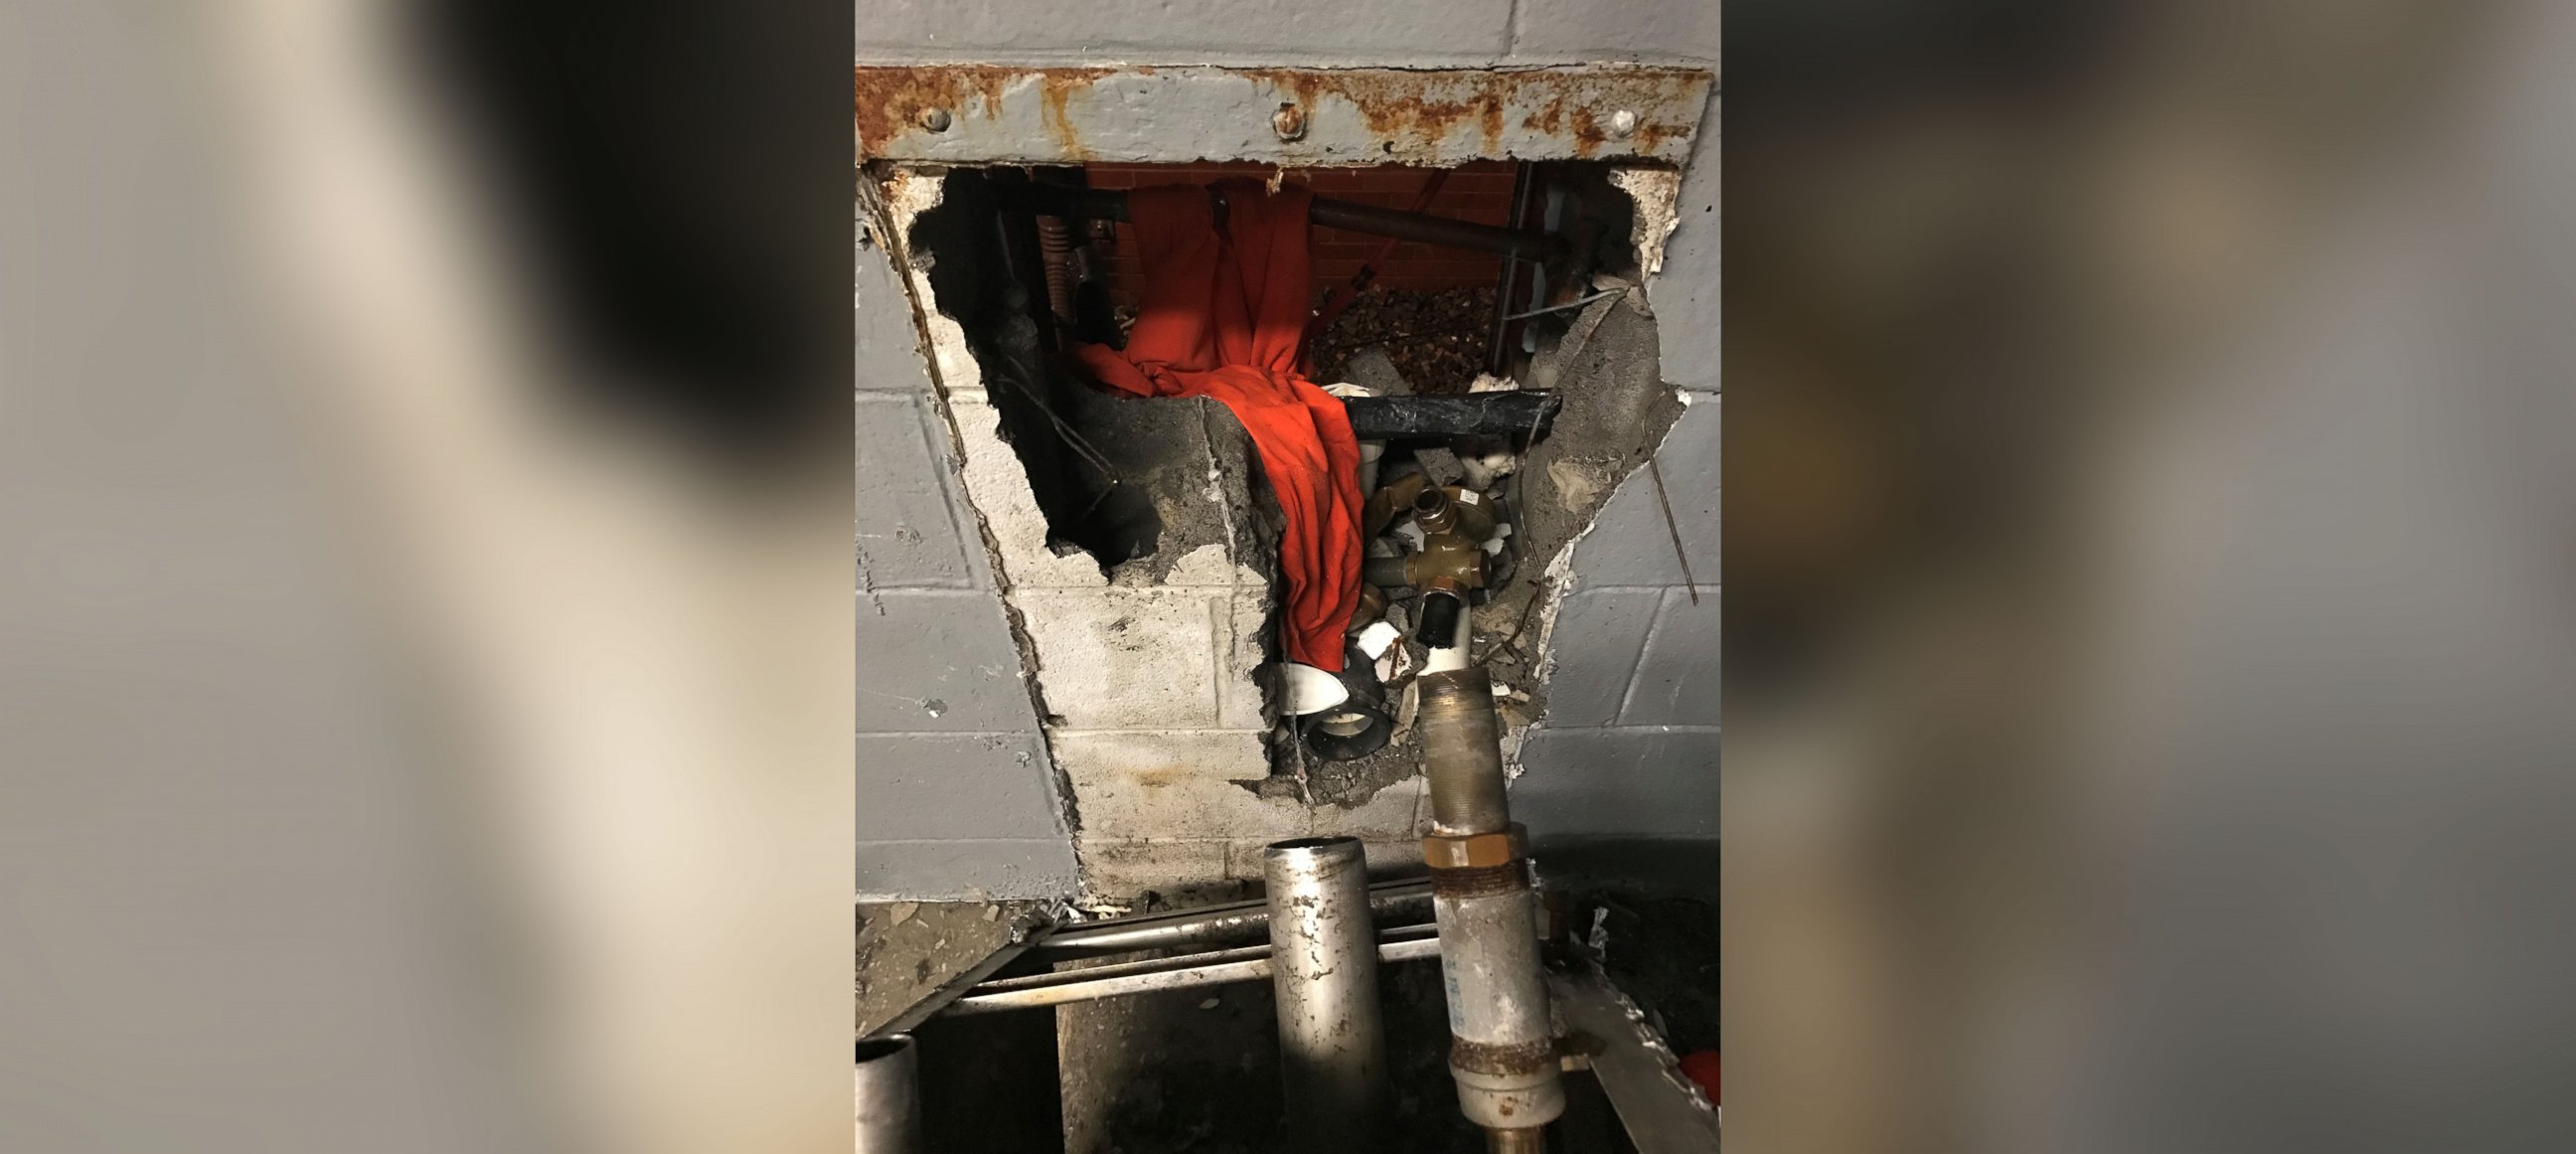 PHOTO: Six inmates escaped from a jail in Cocke County, Tennessee, by removing the toilet from the wall.